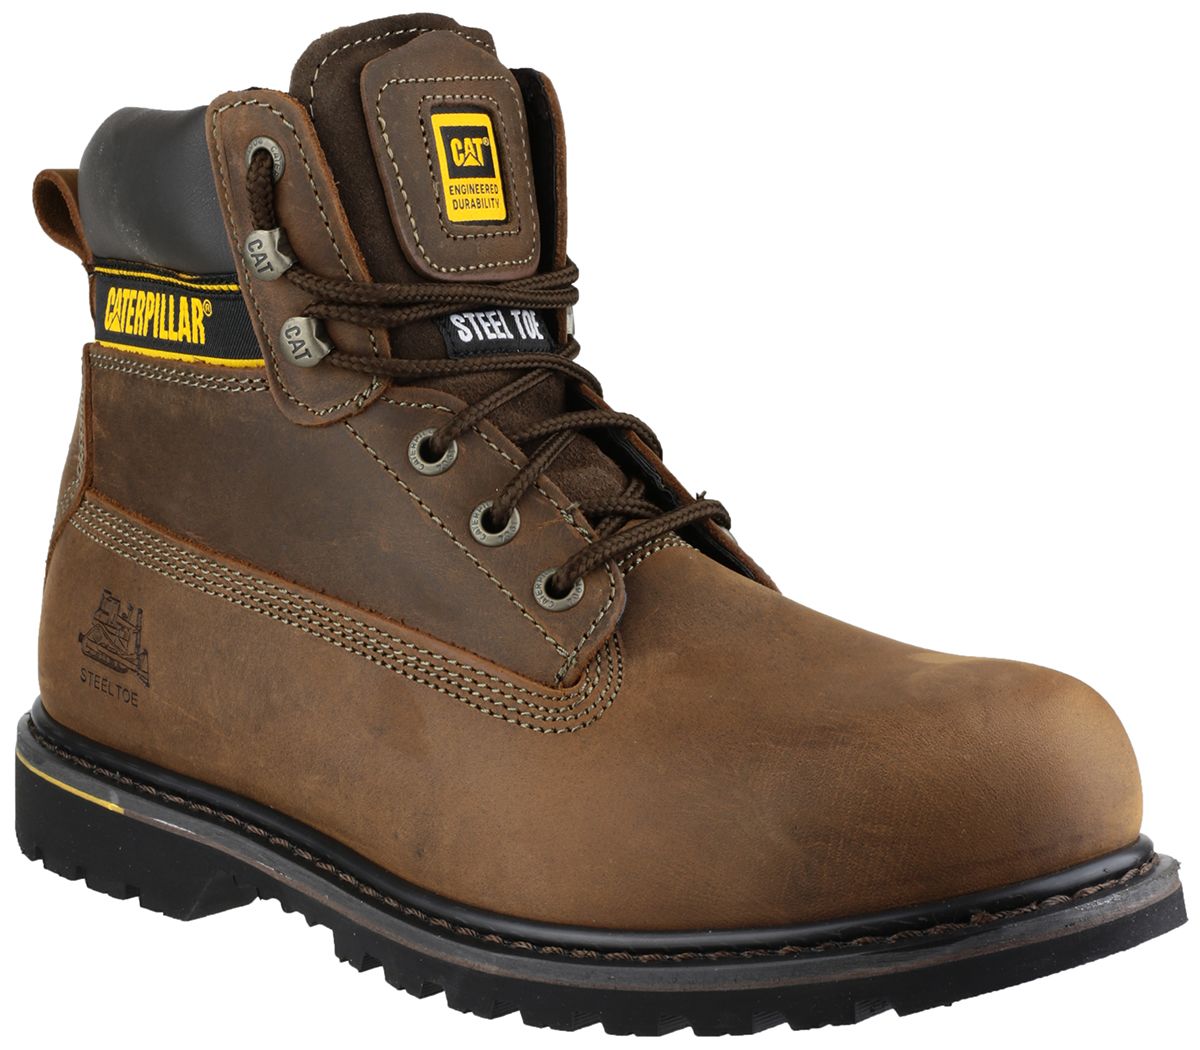 CAT Holton Brown Steel Toe Capped Mens Safety Boots, UK 10, EU 44